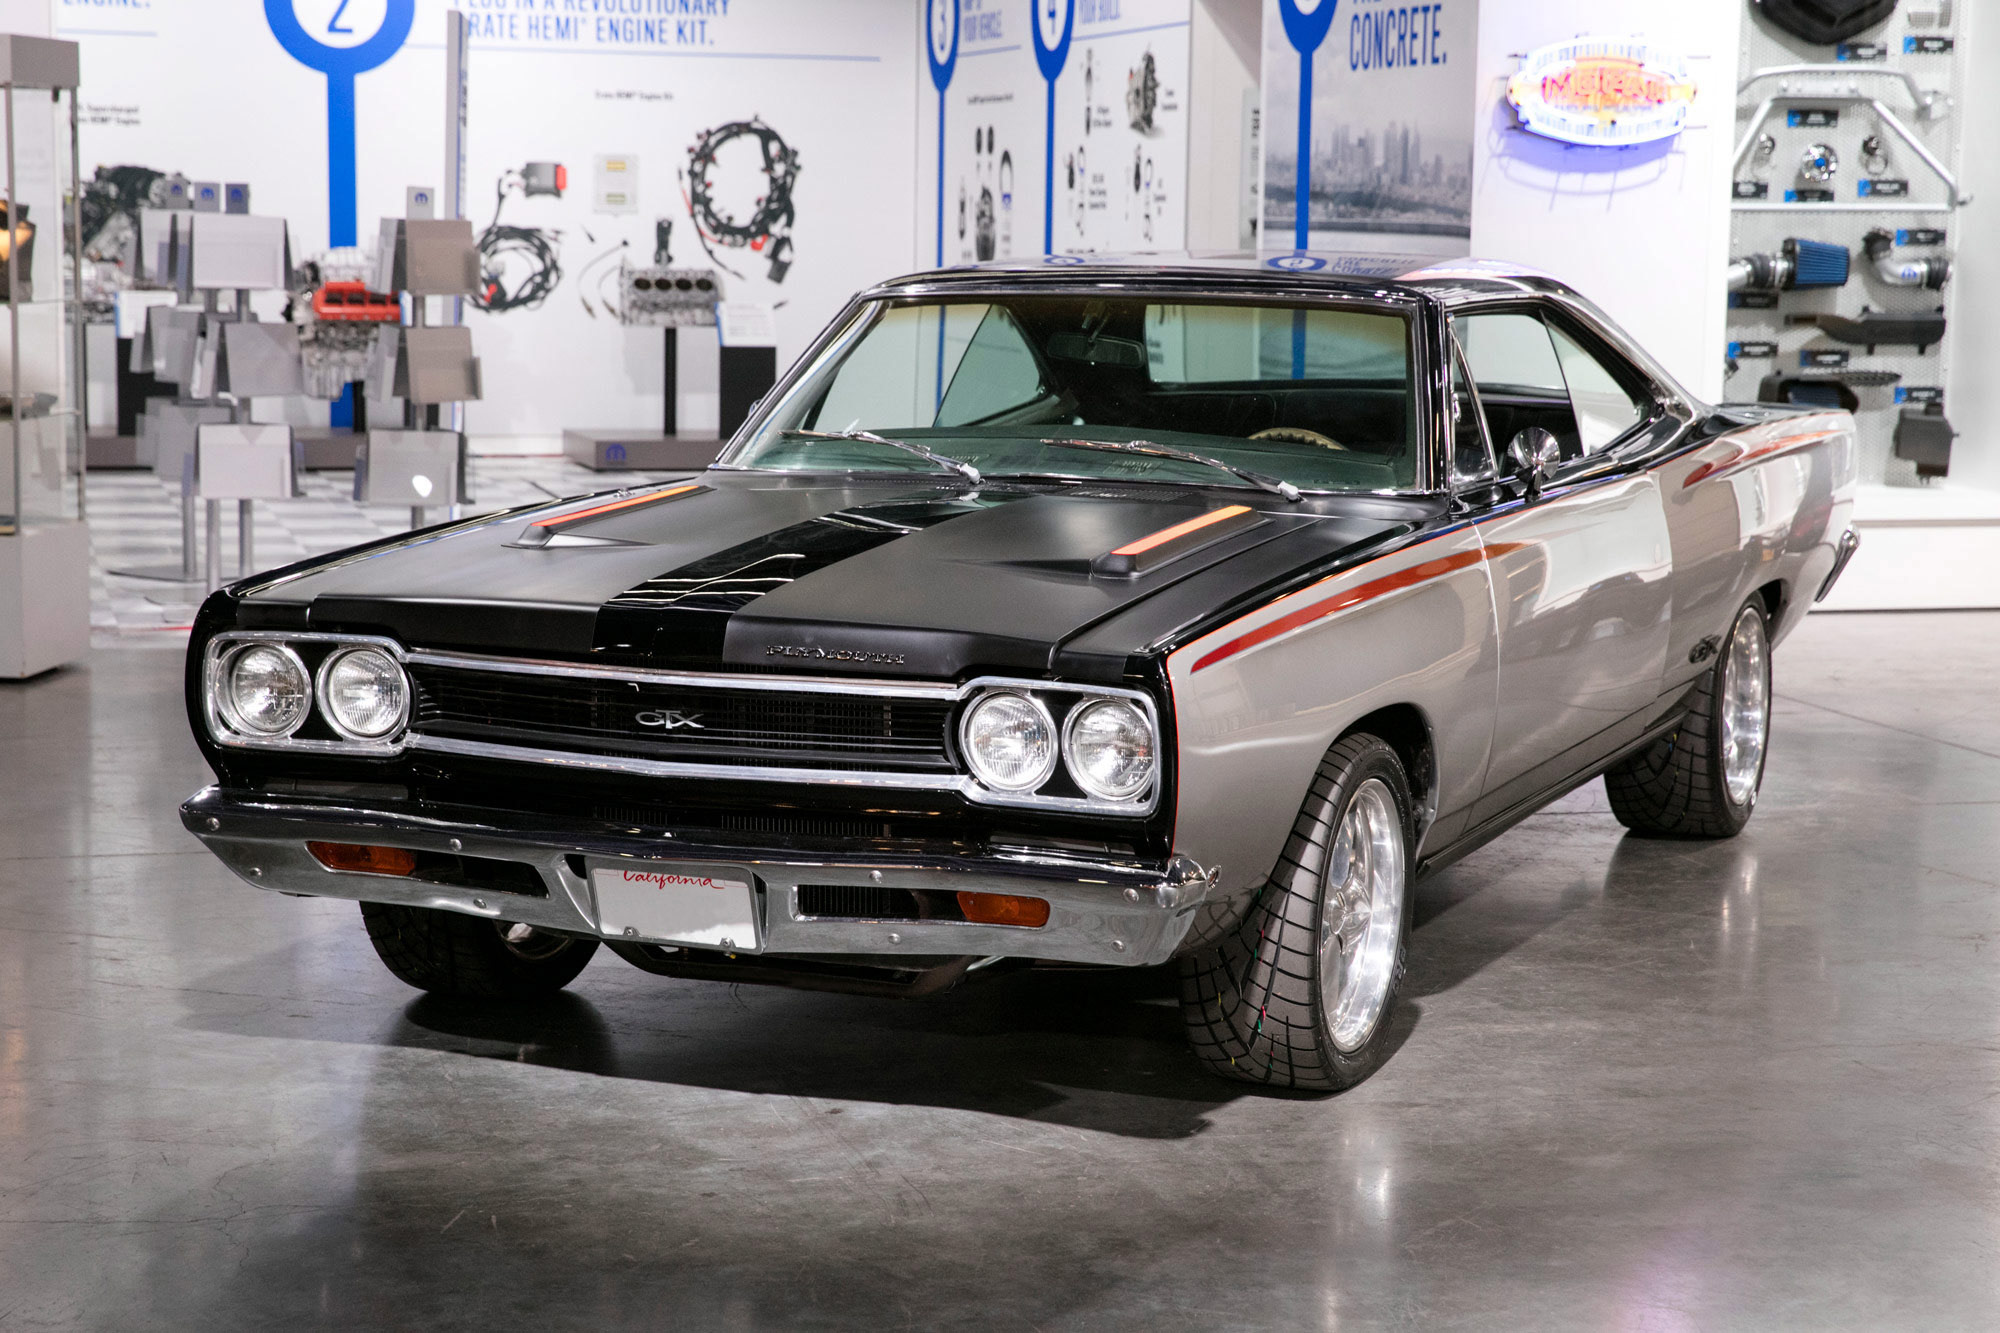 1968 Plymouth GTX classic muscle car parked in showroom